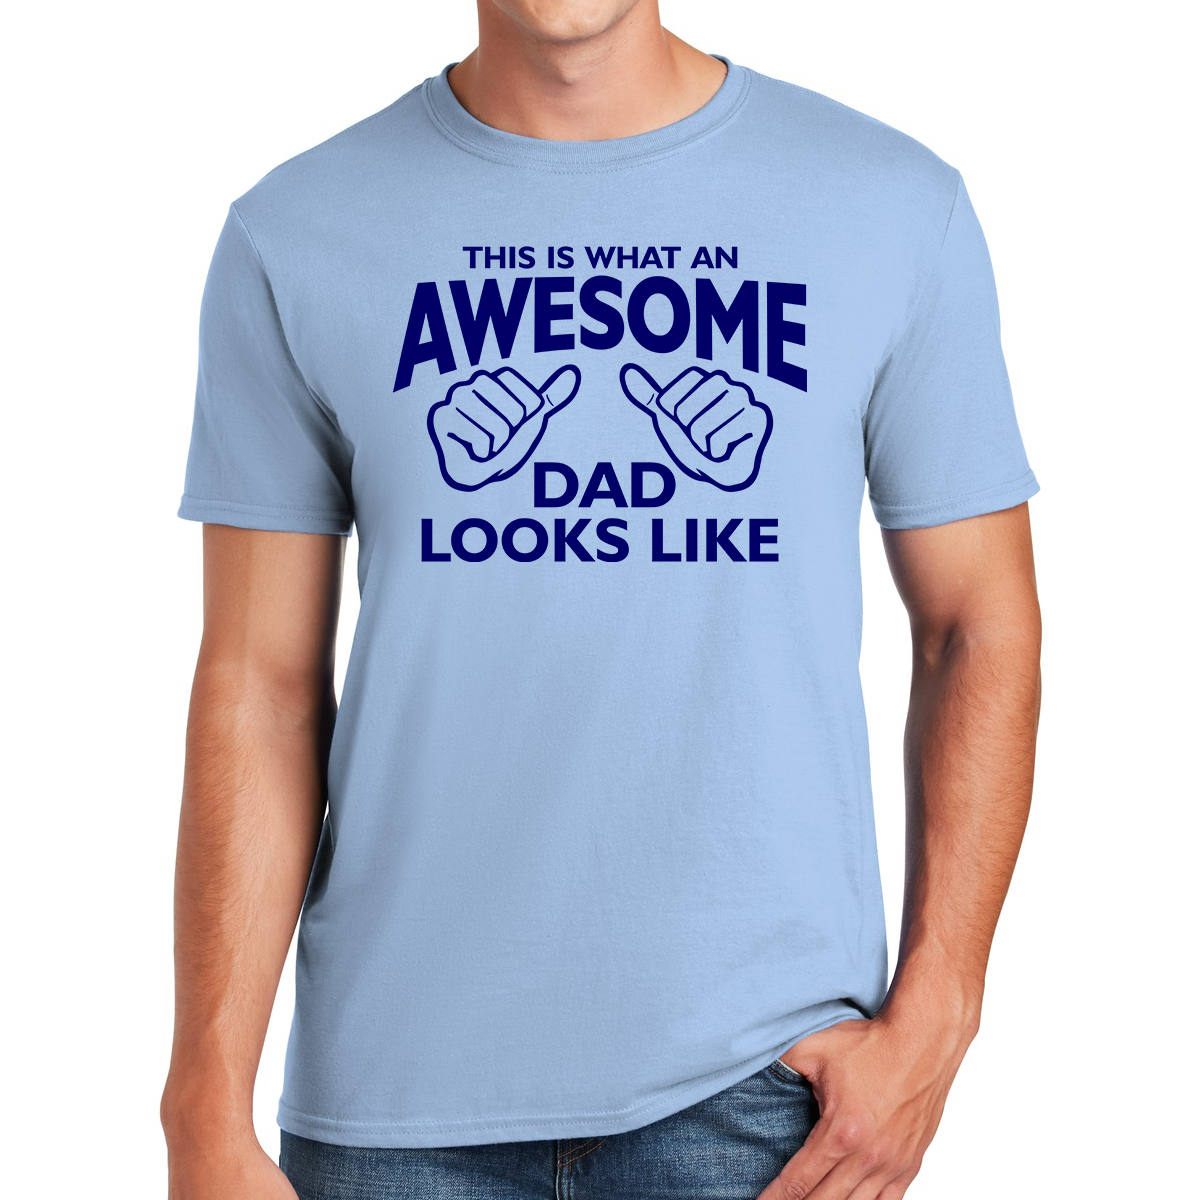 This Is What an Awesome Dad Looks Like Gift For Dads T-shirt